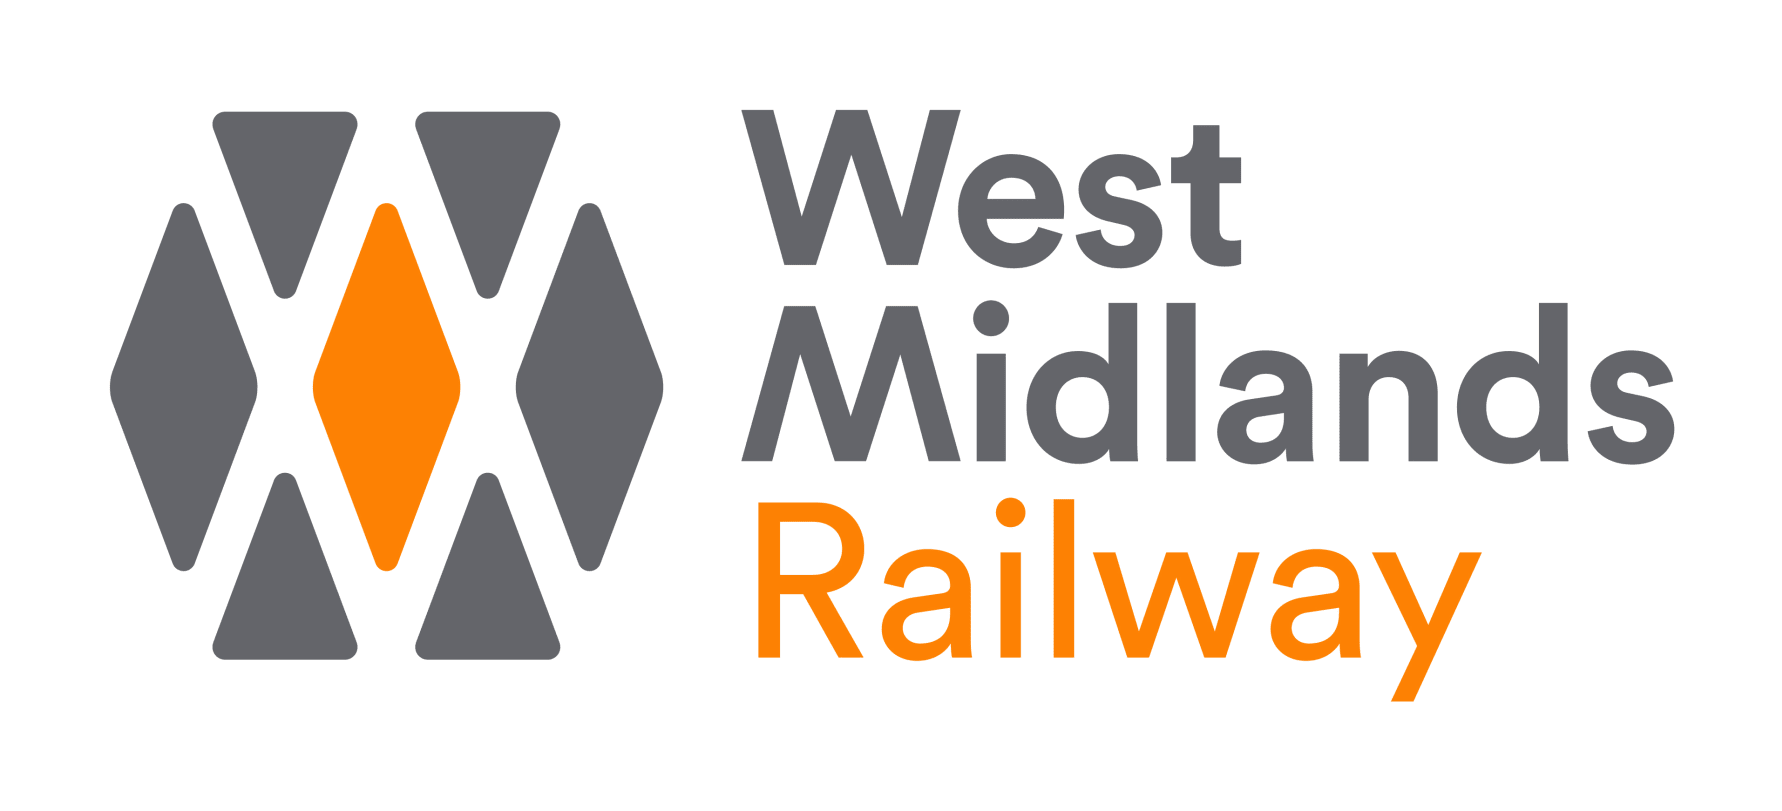 Reduced train service between Leamington Spa and Nuneaton due to impact of Covid-19